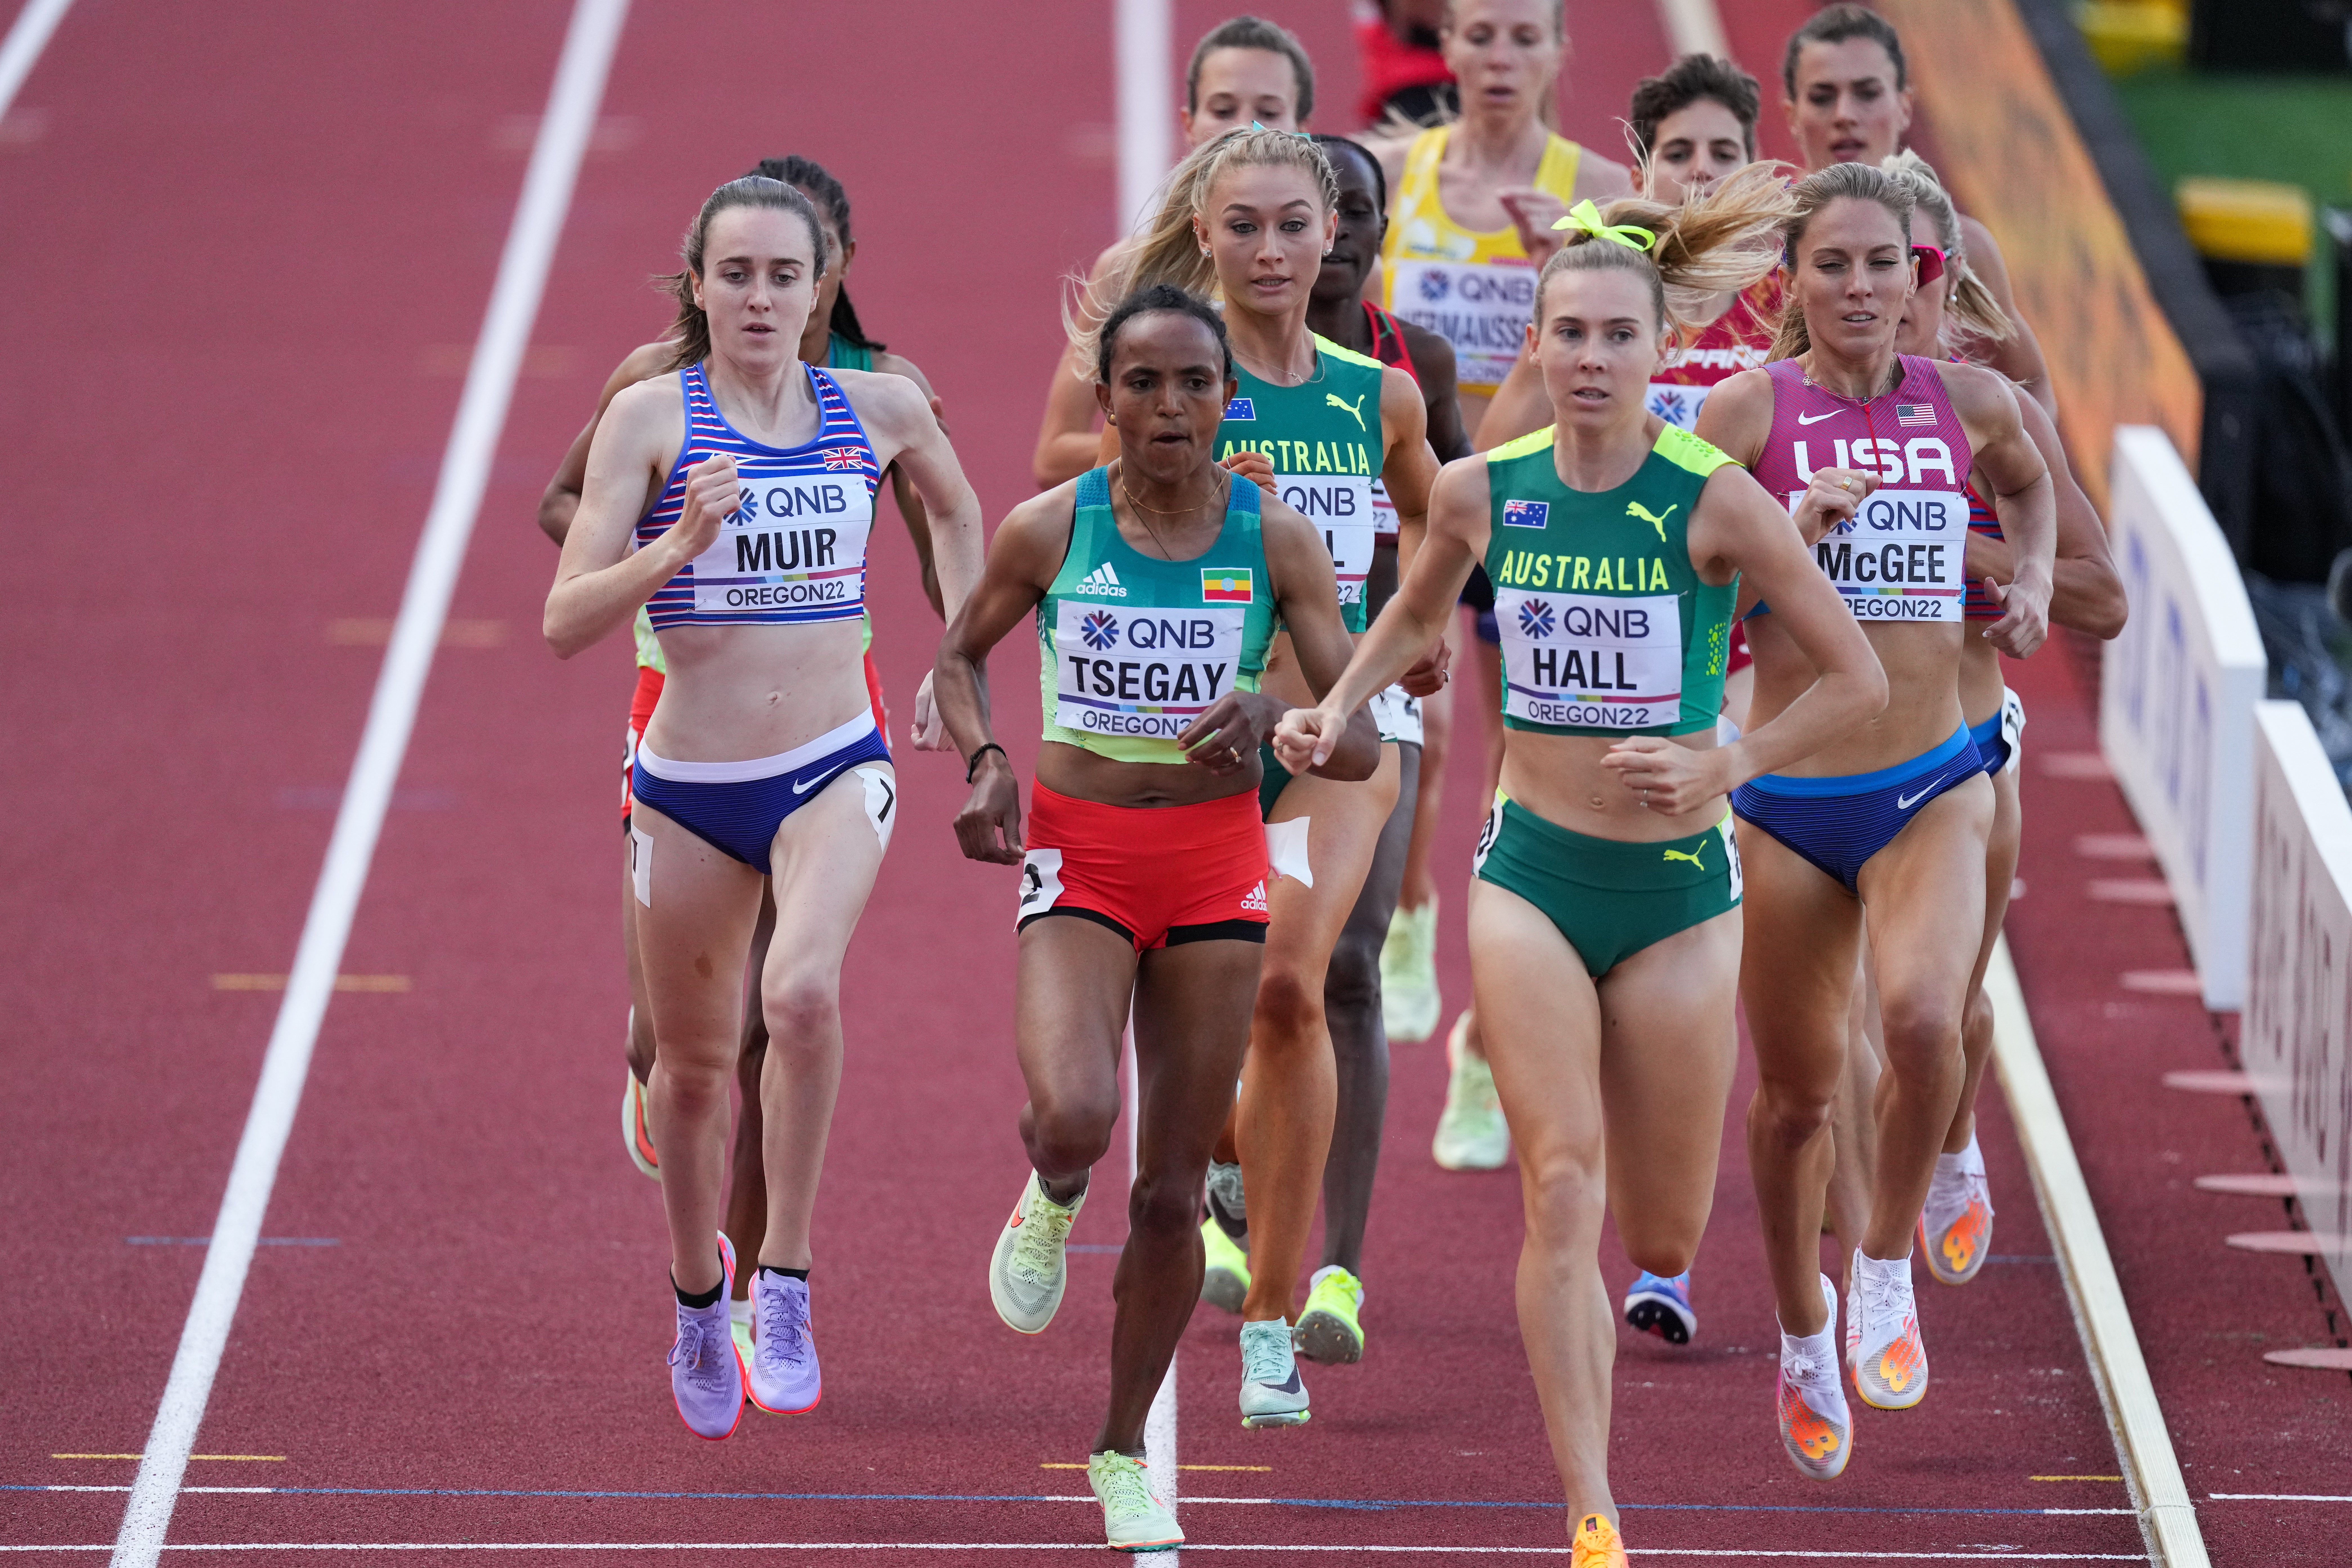 Laura Muir, left, progressed to the women’s 1500m semi-finals by finishing second in her heat (Martin Rickett/PA)